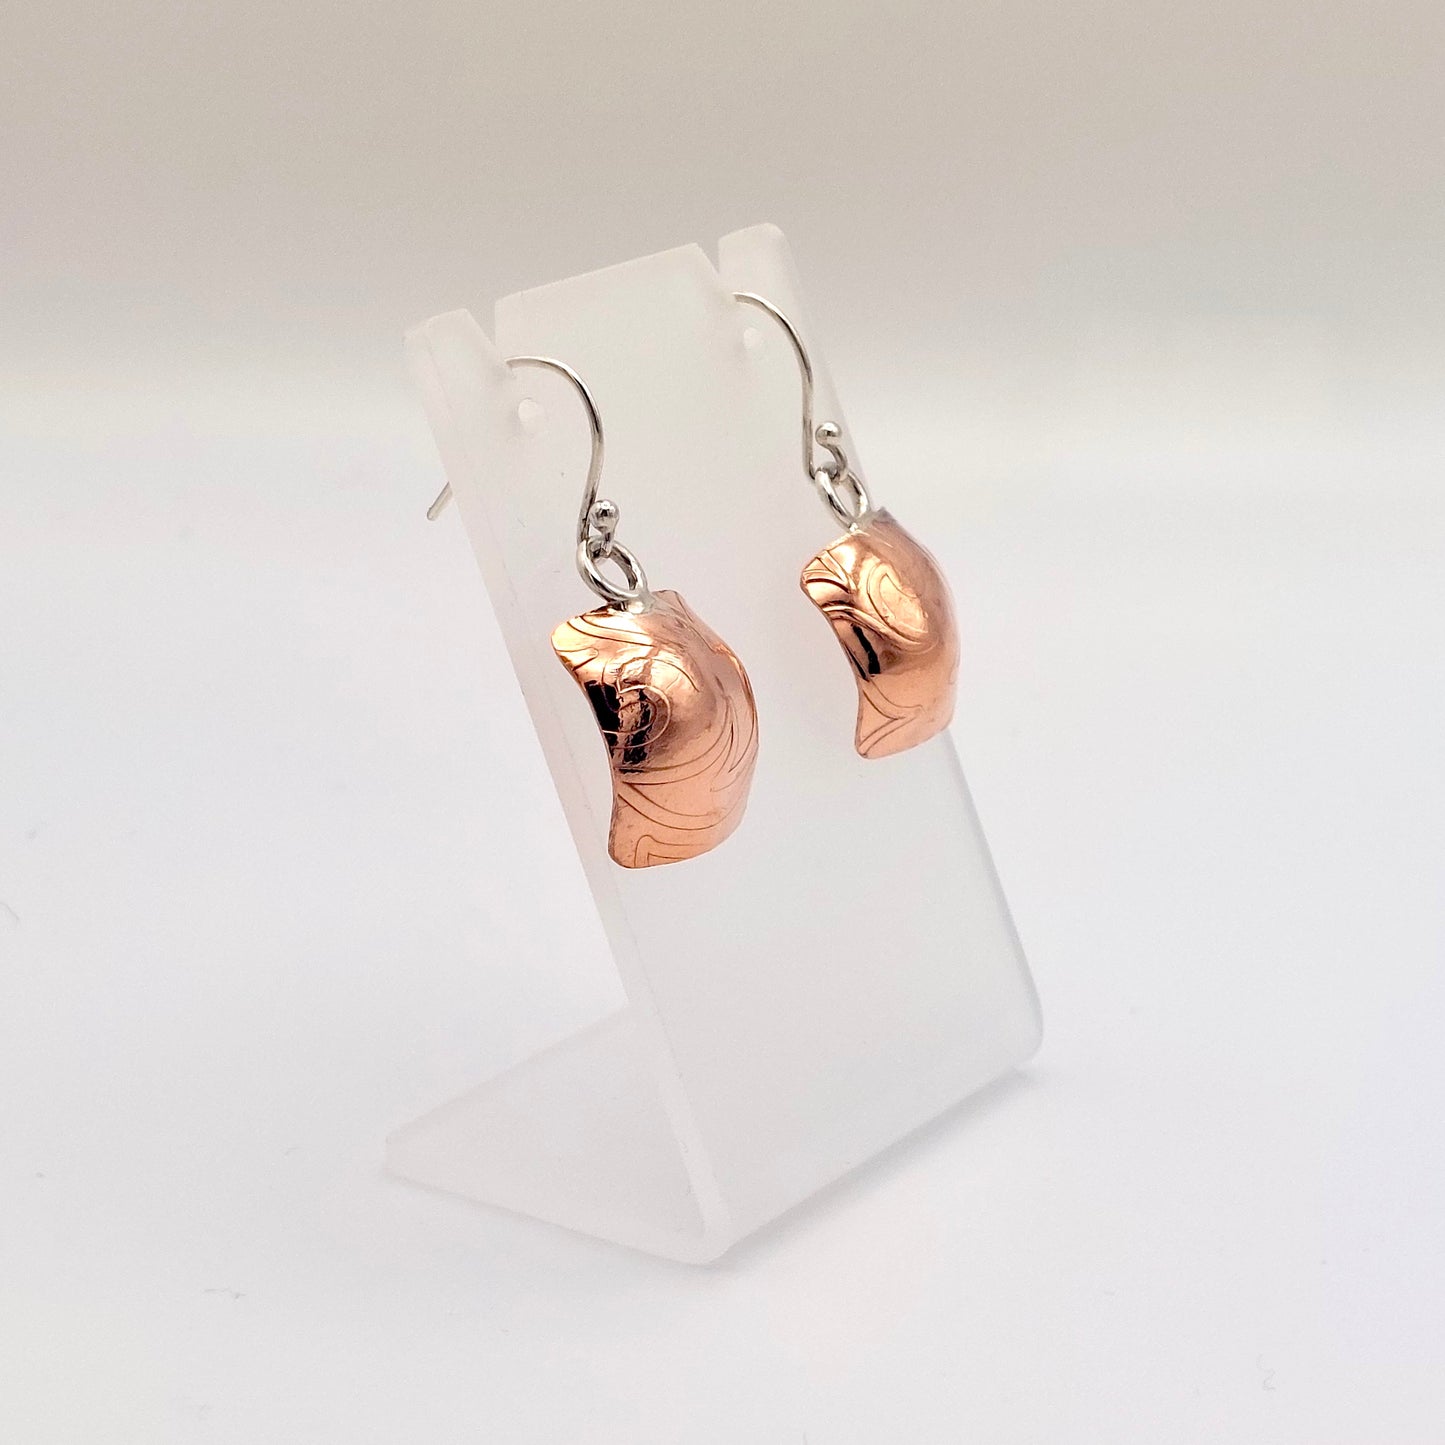 Domed/Curved Copper Earrings